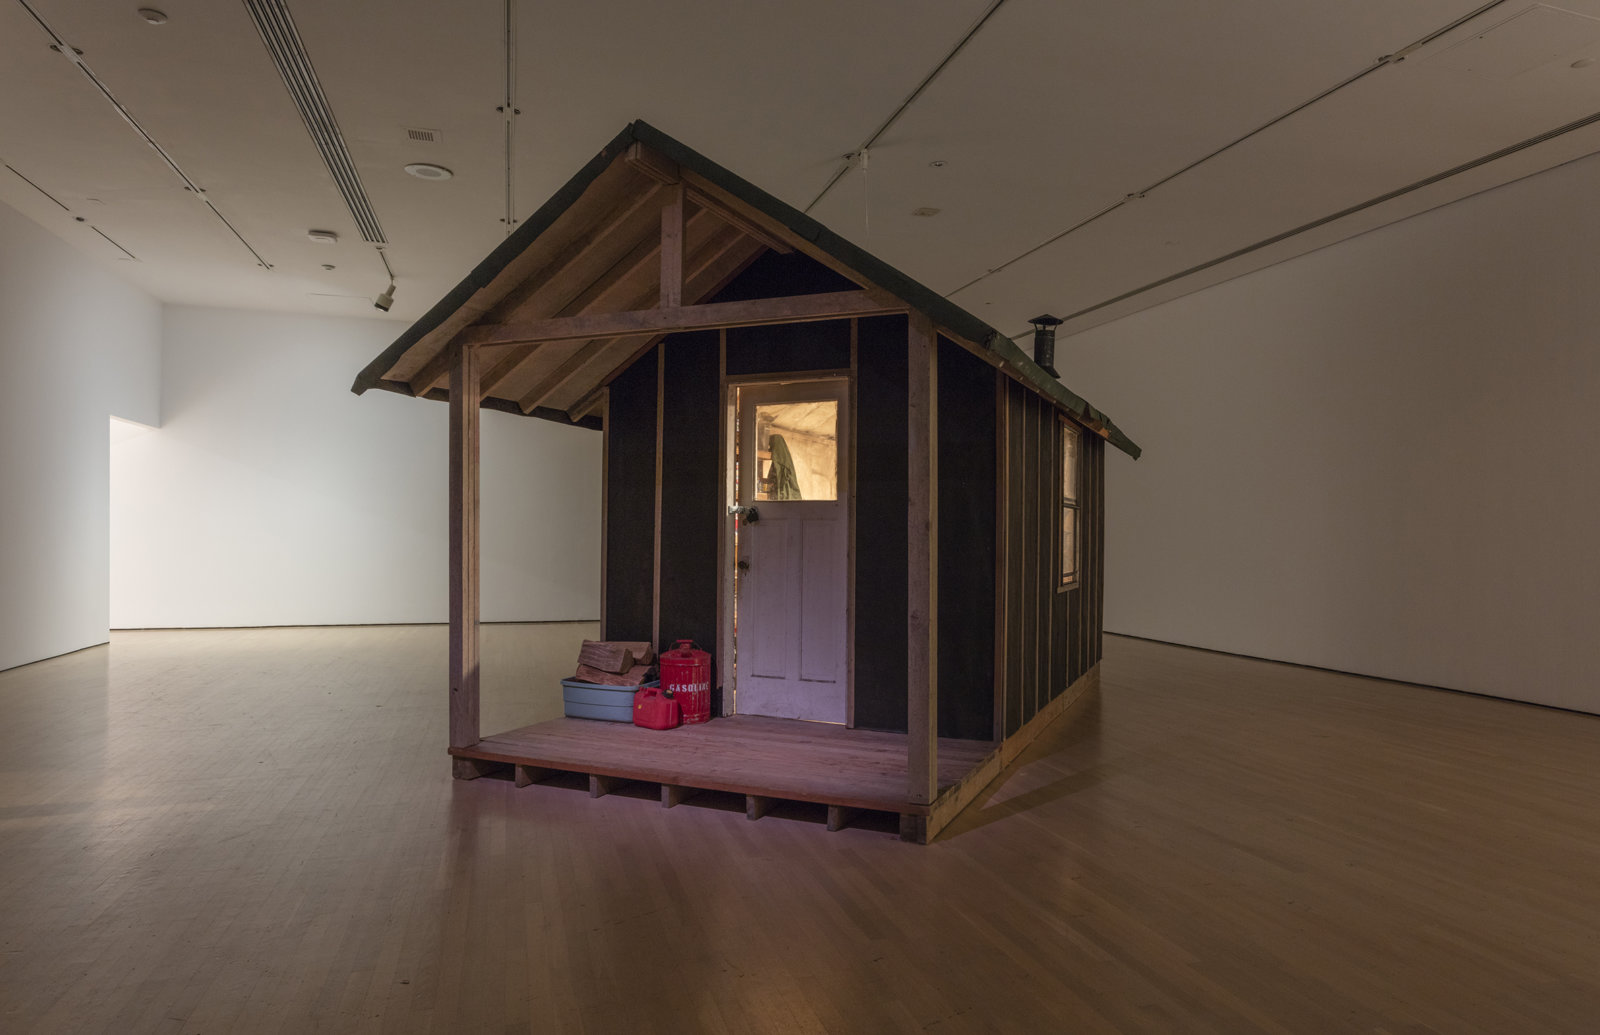 Liz Magor, Messenger, 1996–2002, wood, plaster, textile, found objects, dimensions variable